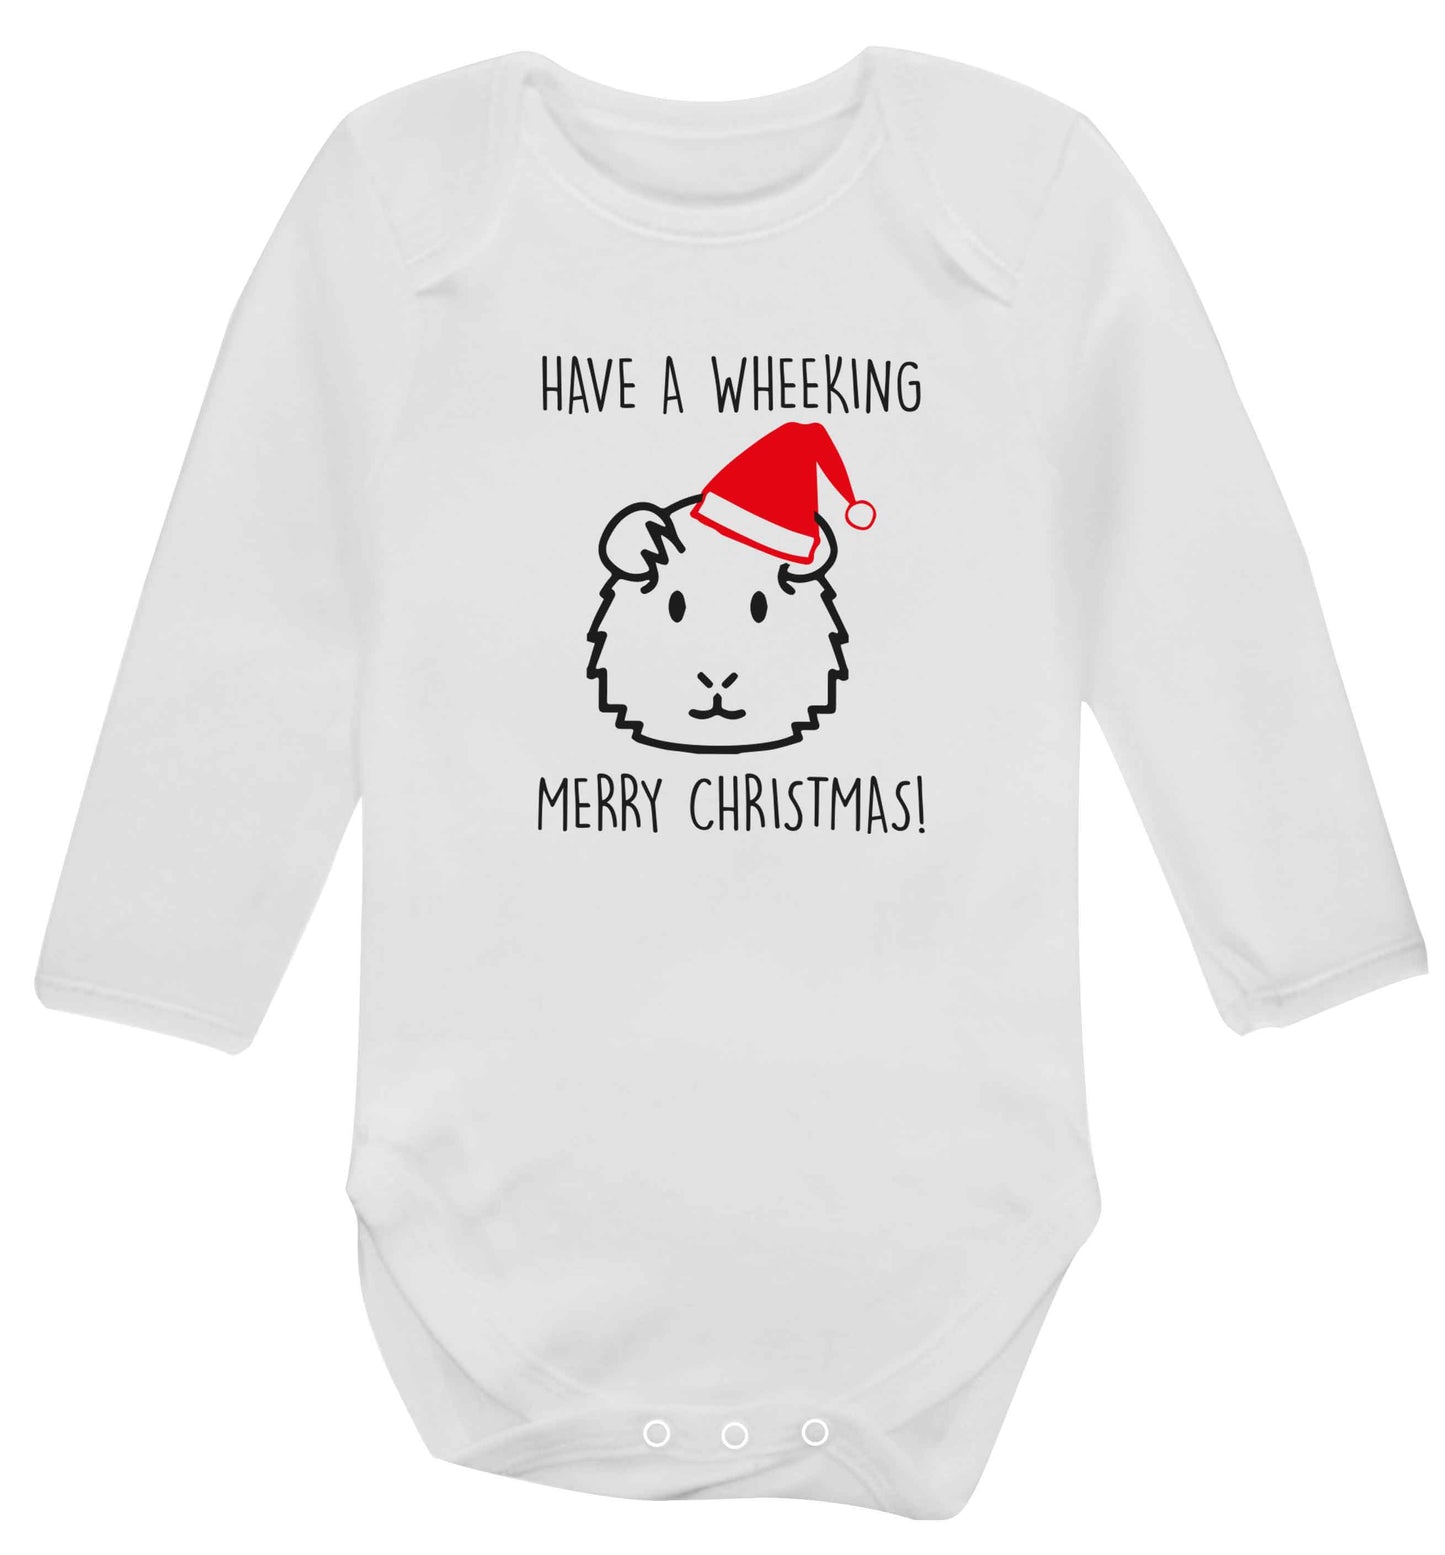 Have a wheeking merry Christmas baby vest long sleeved white 6-12 months